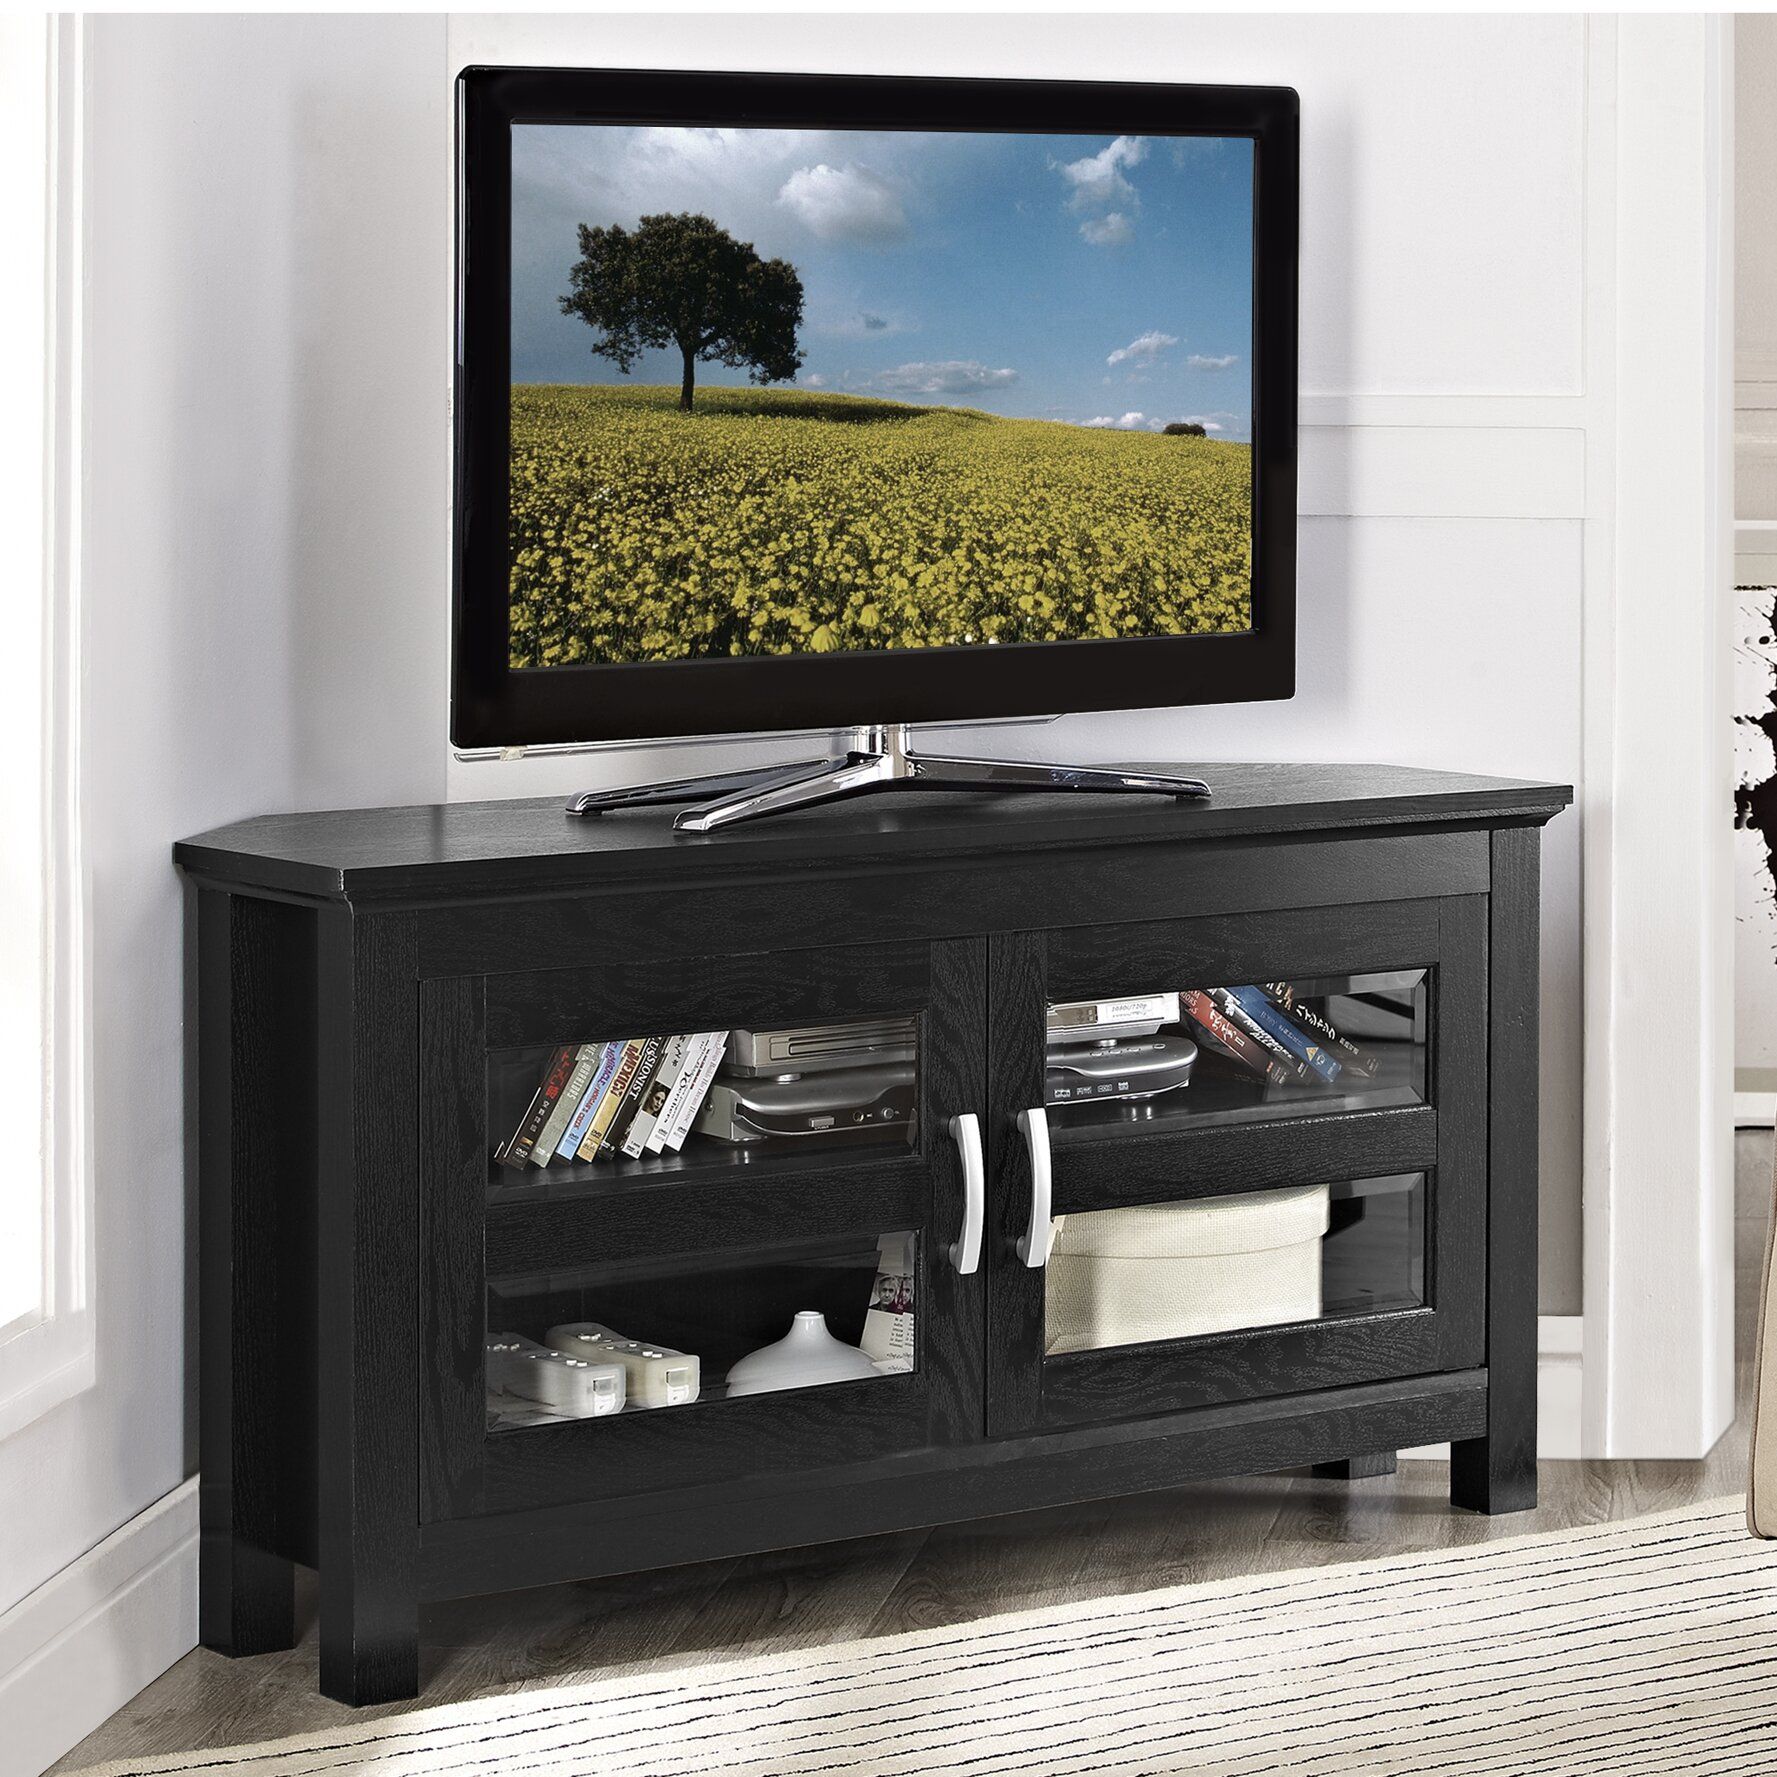 Alcott Hill Sulyard Wood Corner Tv Stand & Reviews | Wayfair Inside Wooden Tv Stands (View 4 of 15)